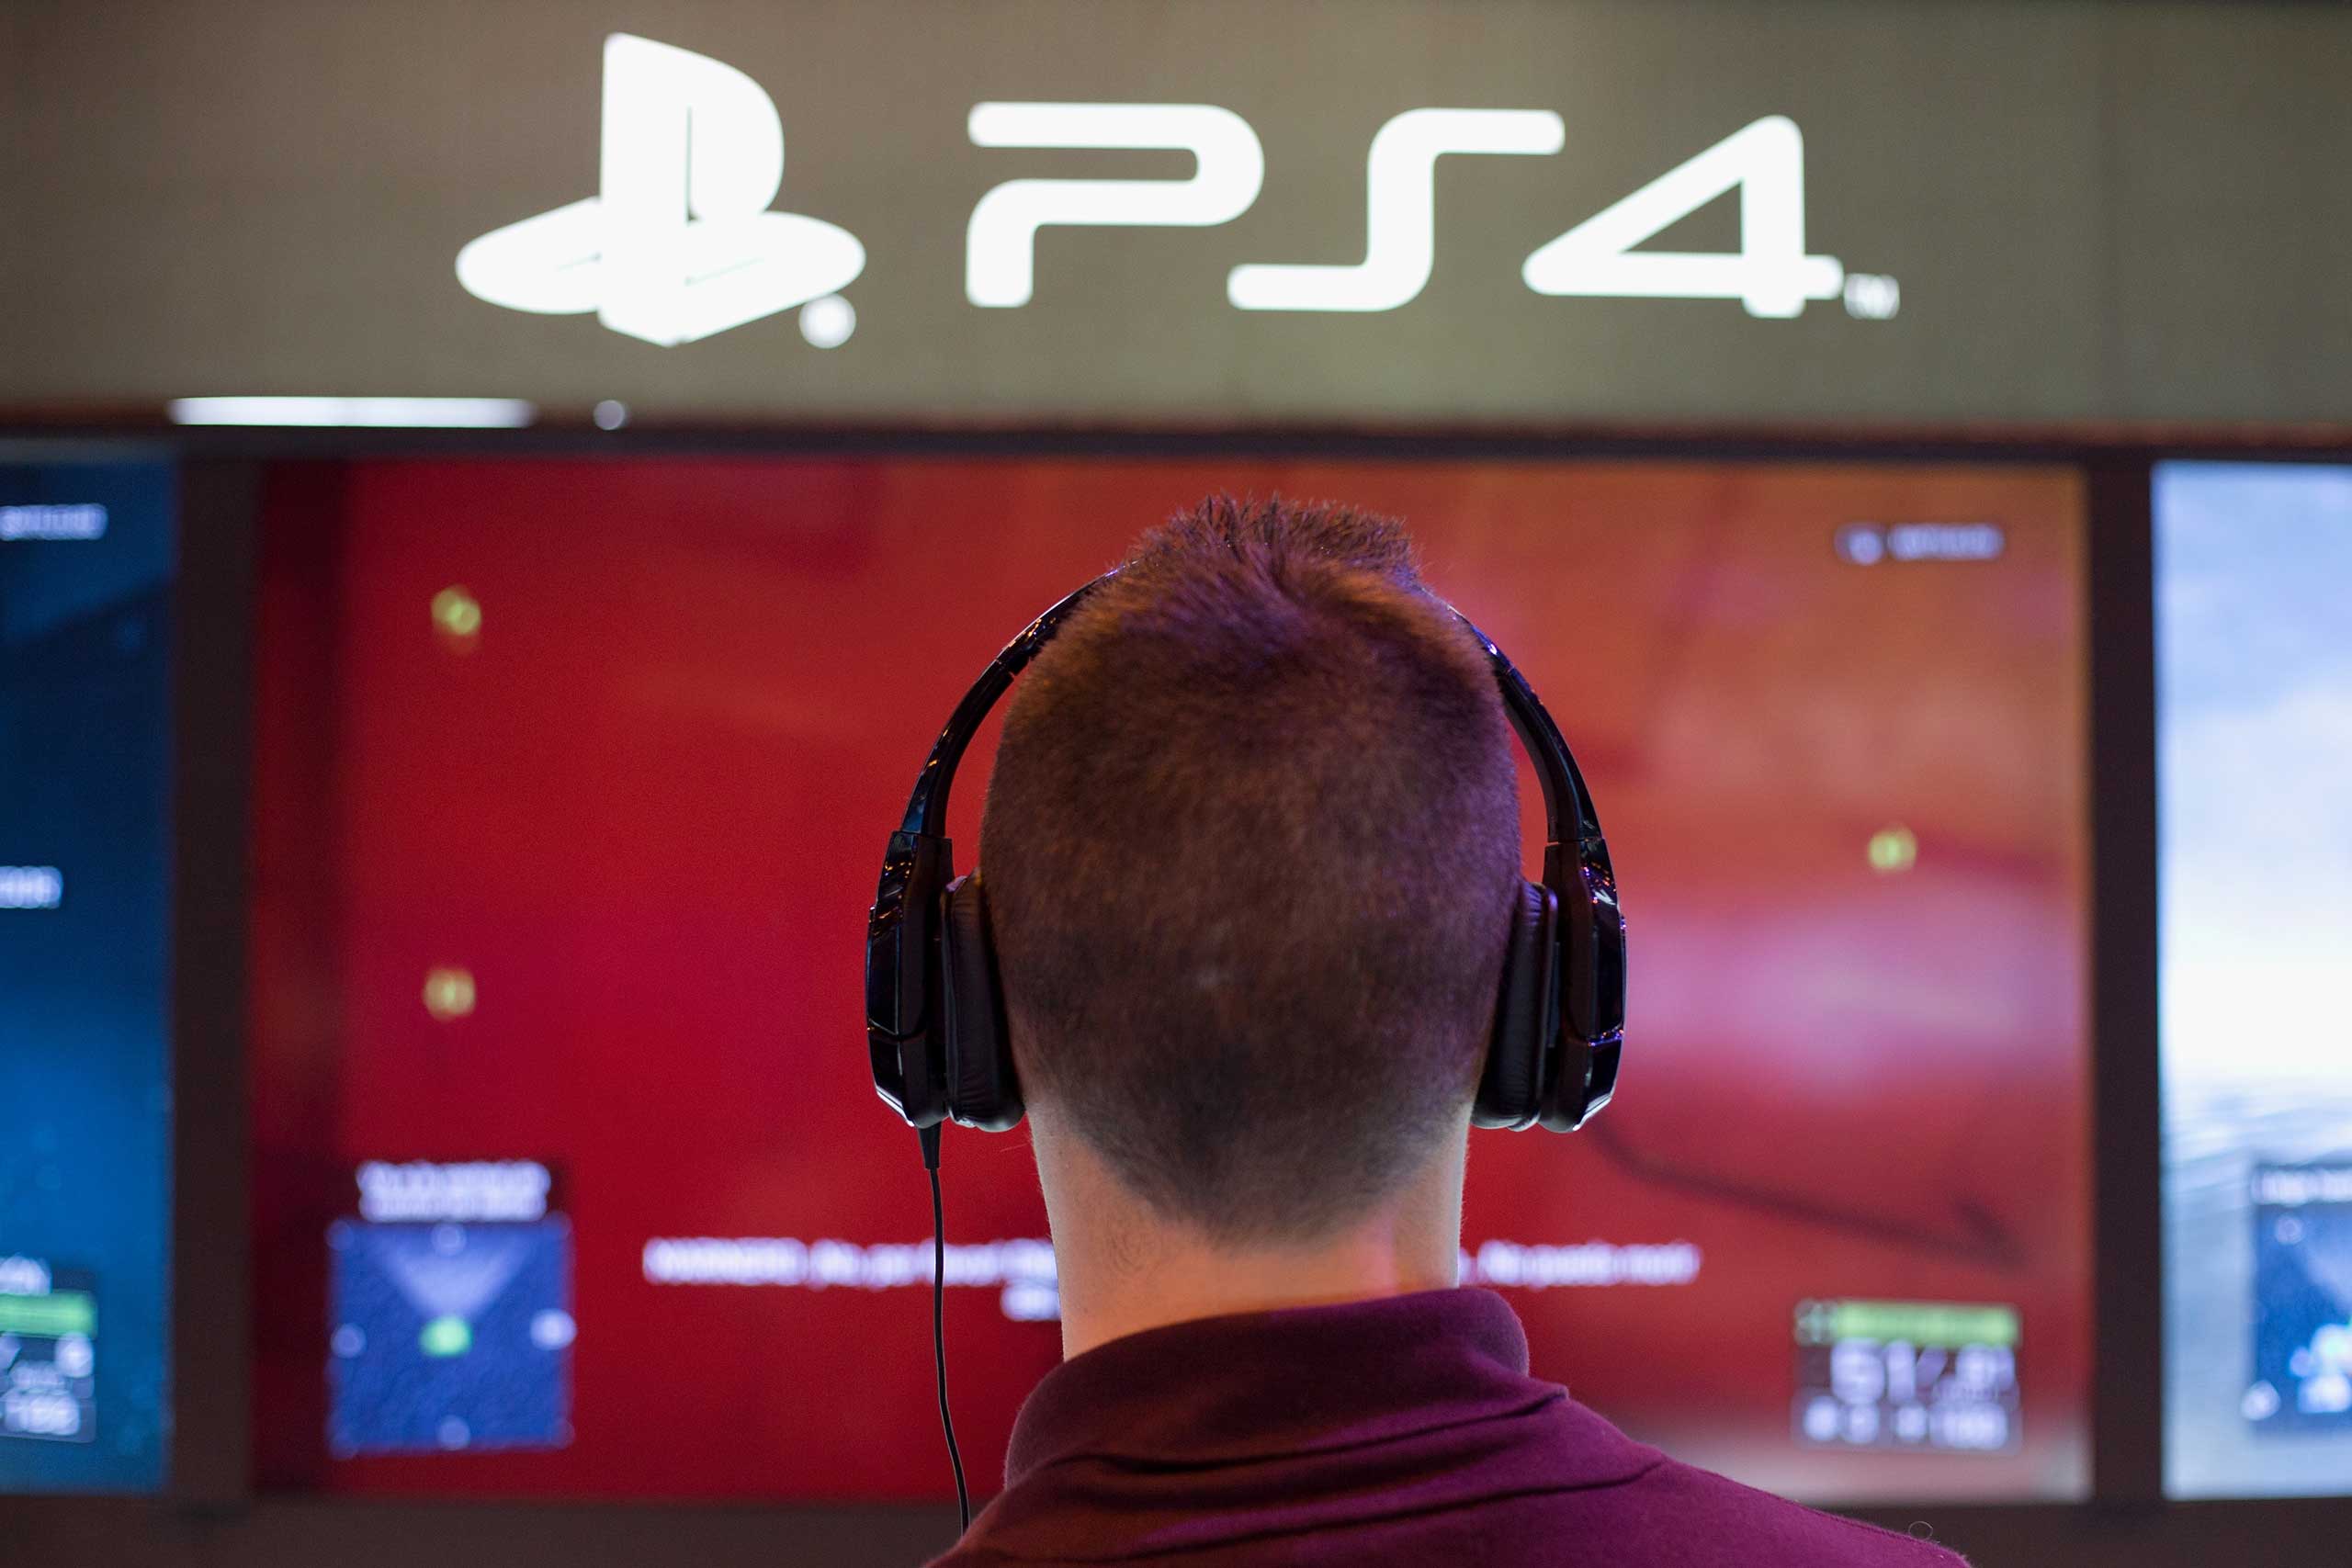 A man plays on a Playstation 4 on Nov. 9, 2013 in Madrid. (Pablo Blazquez Dominguez—Getty Images)